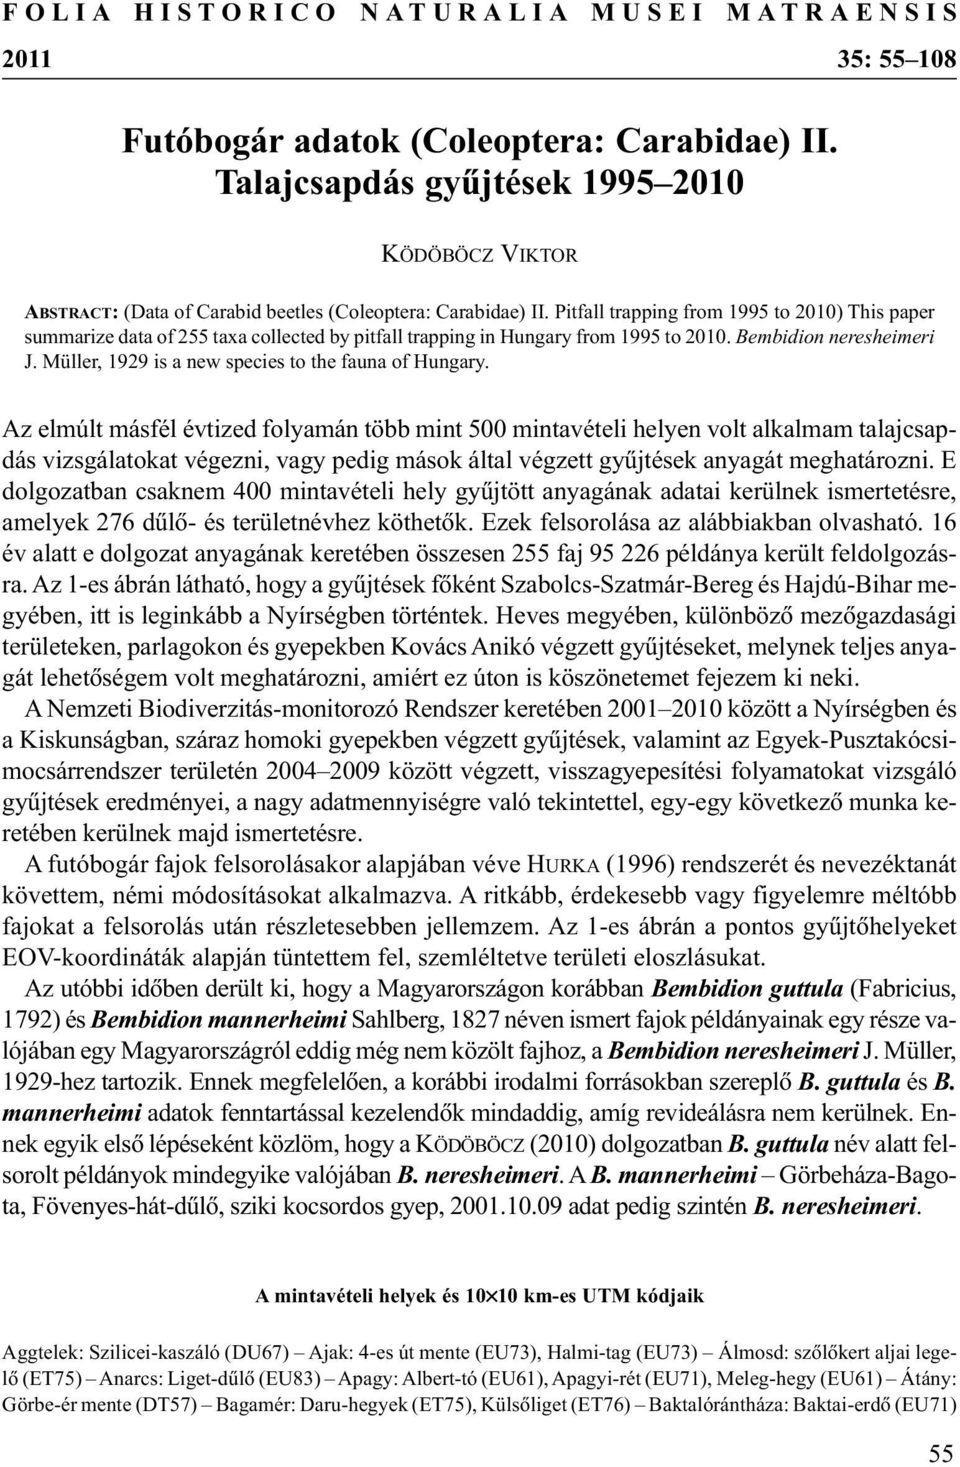 Pitfall trapping from 1995 to 2010) This paper summarize data of 255 taxa collected by pitfall trapping in Hungary from 1995 to 2010. Bembidion neresheimeri J.